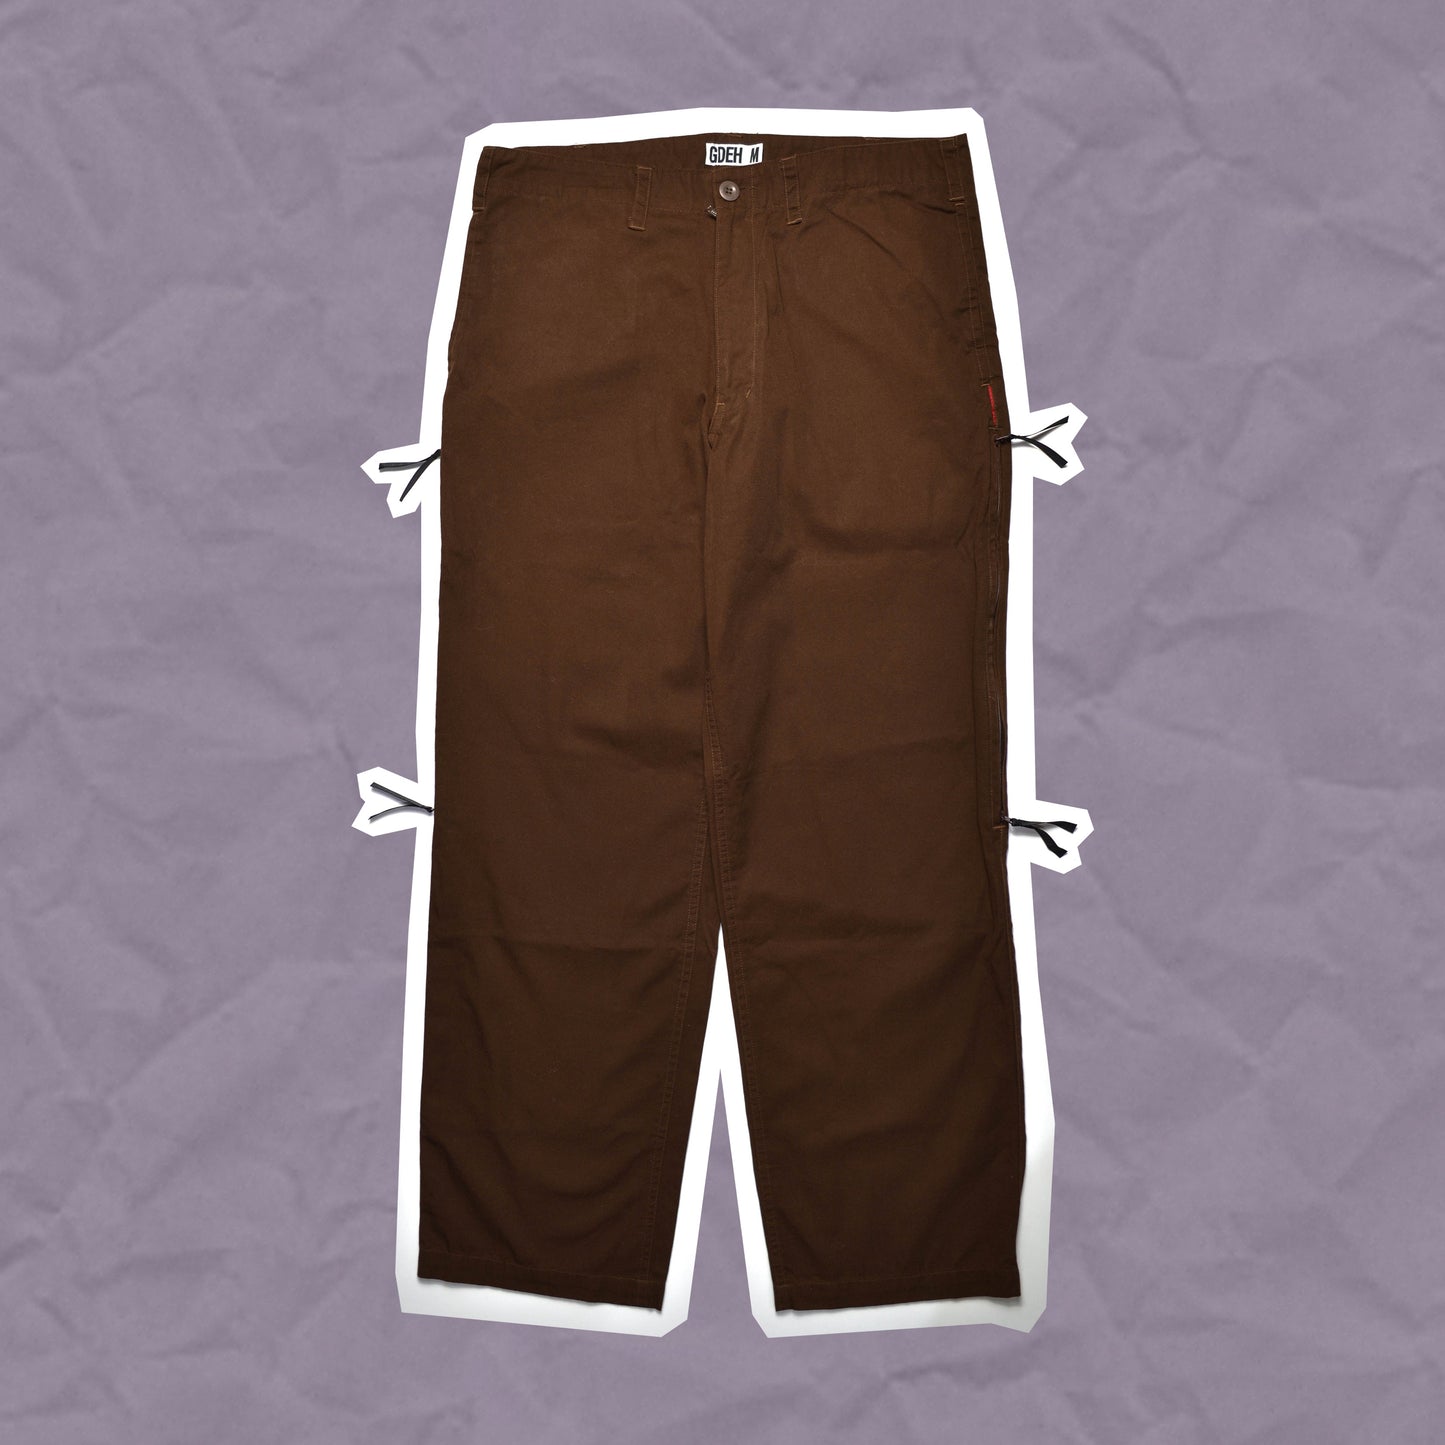 GOODENOUGH Brown Ventilated Technical Pants (M)